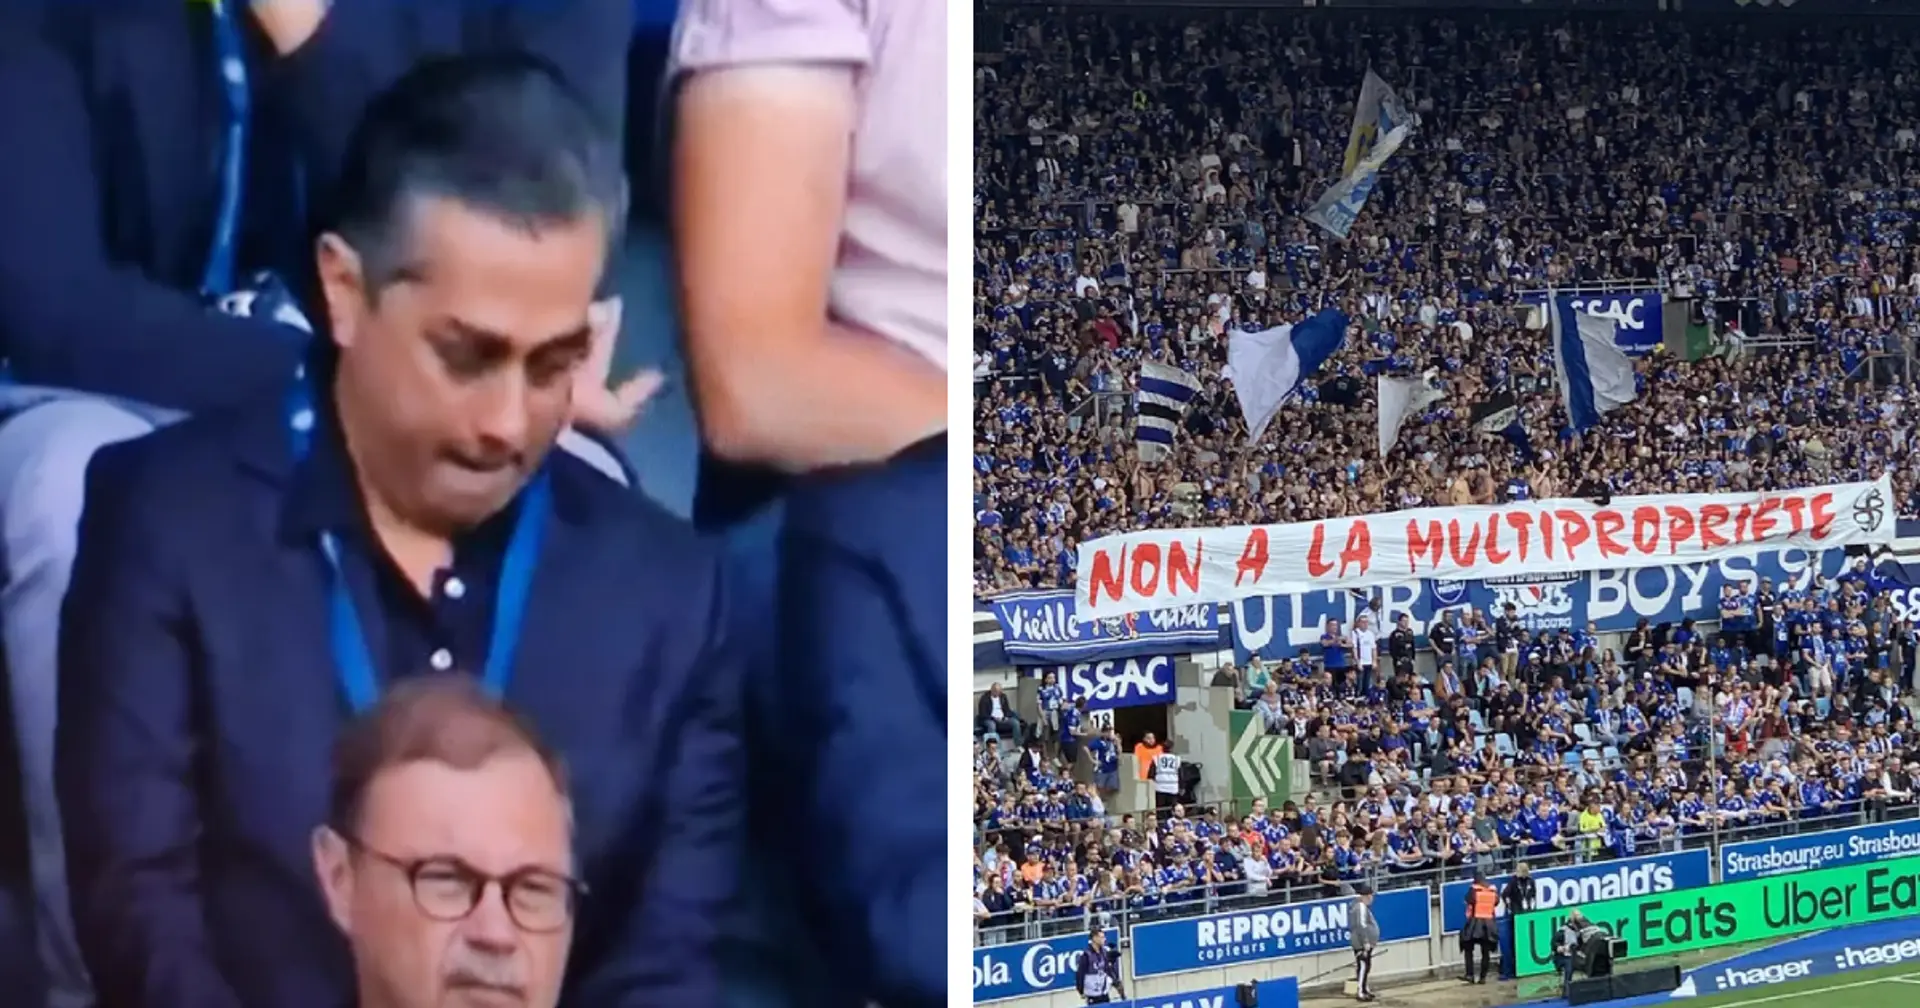 Chelsea co-owner attends Strasbourg game, fans stage protest against multi-club model